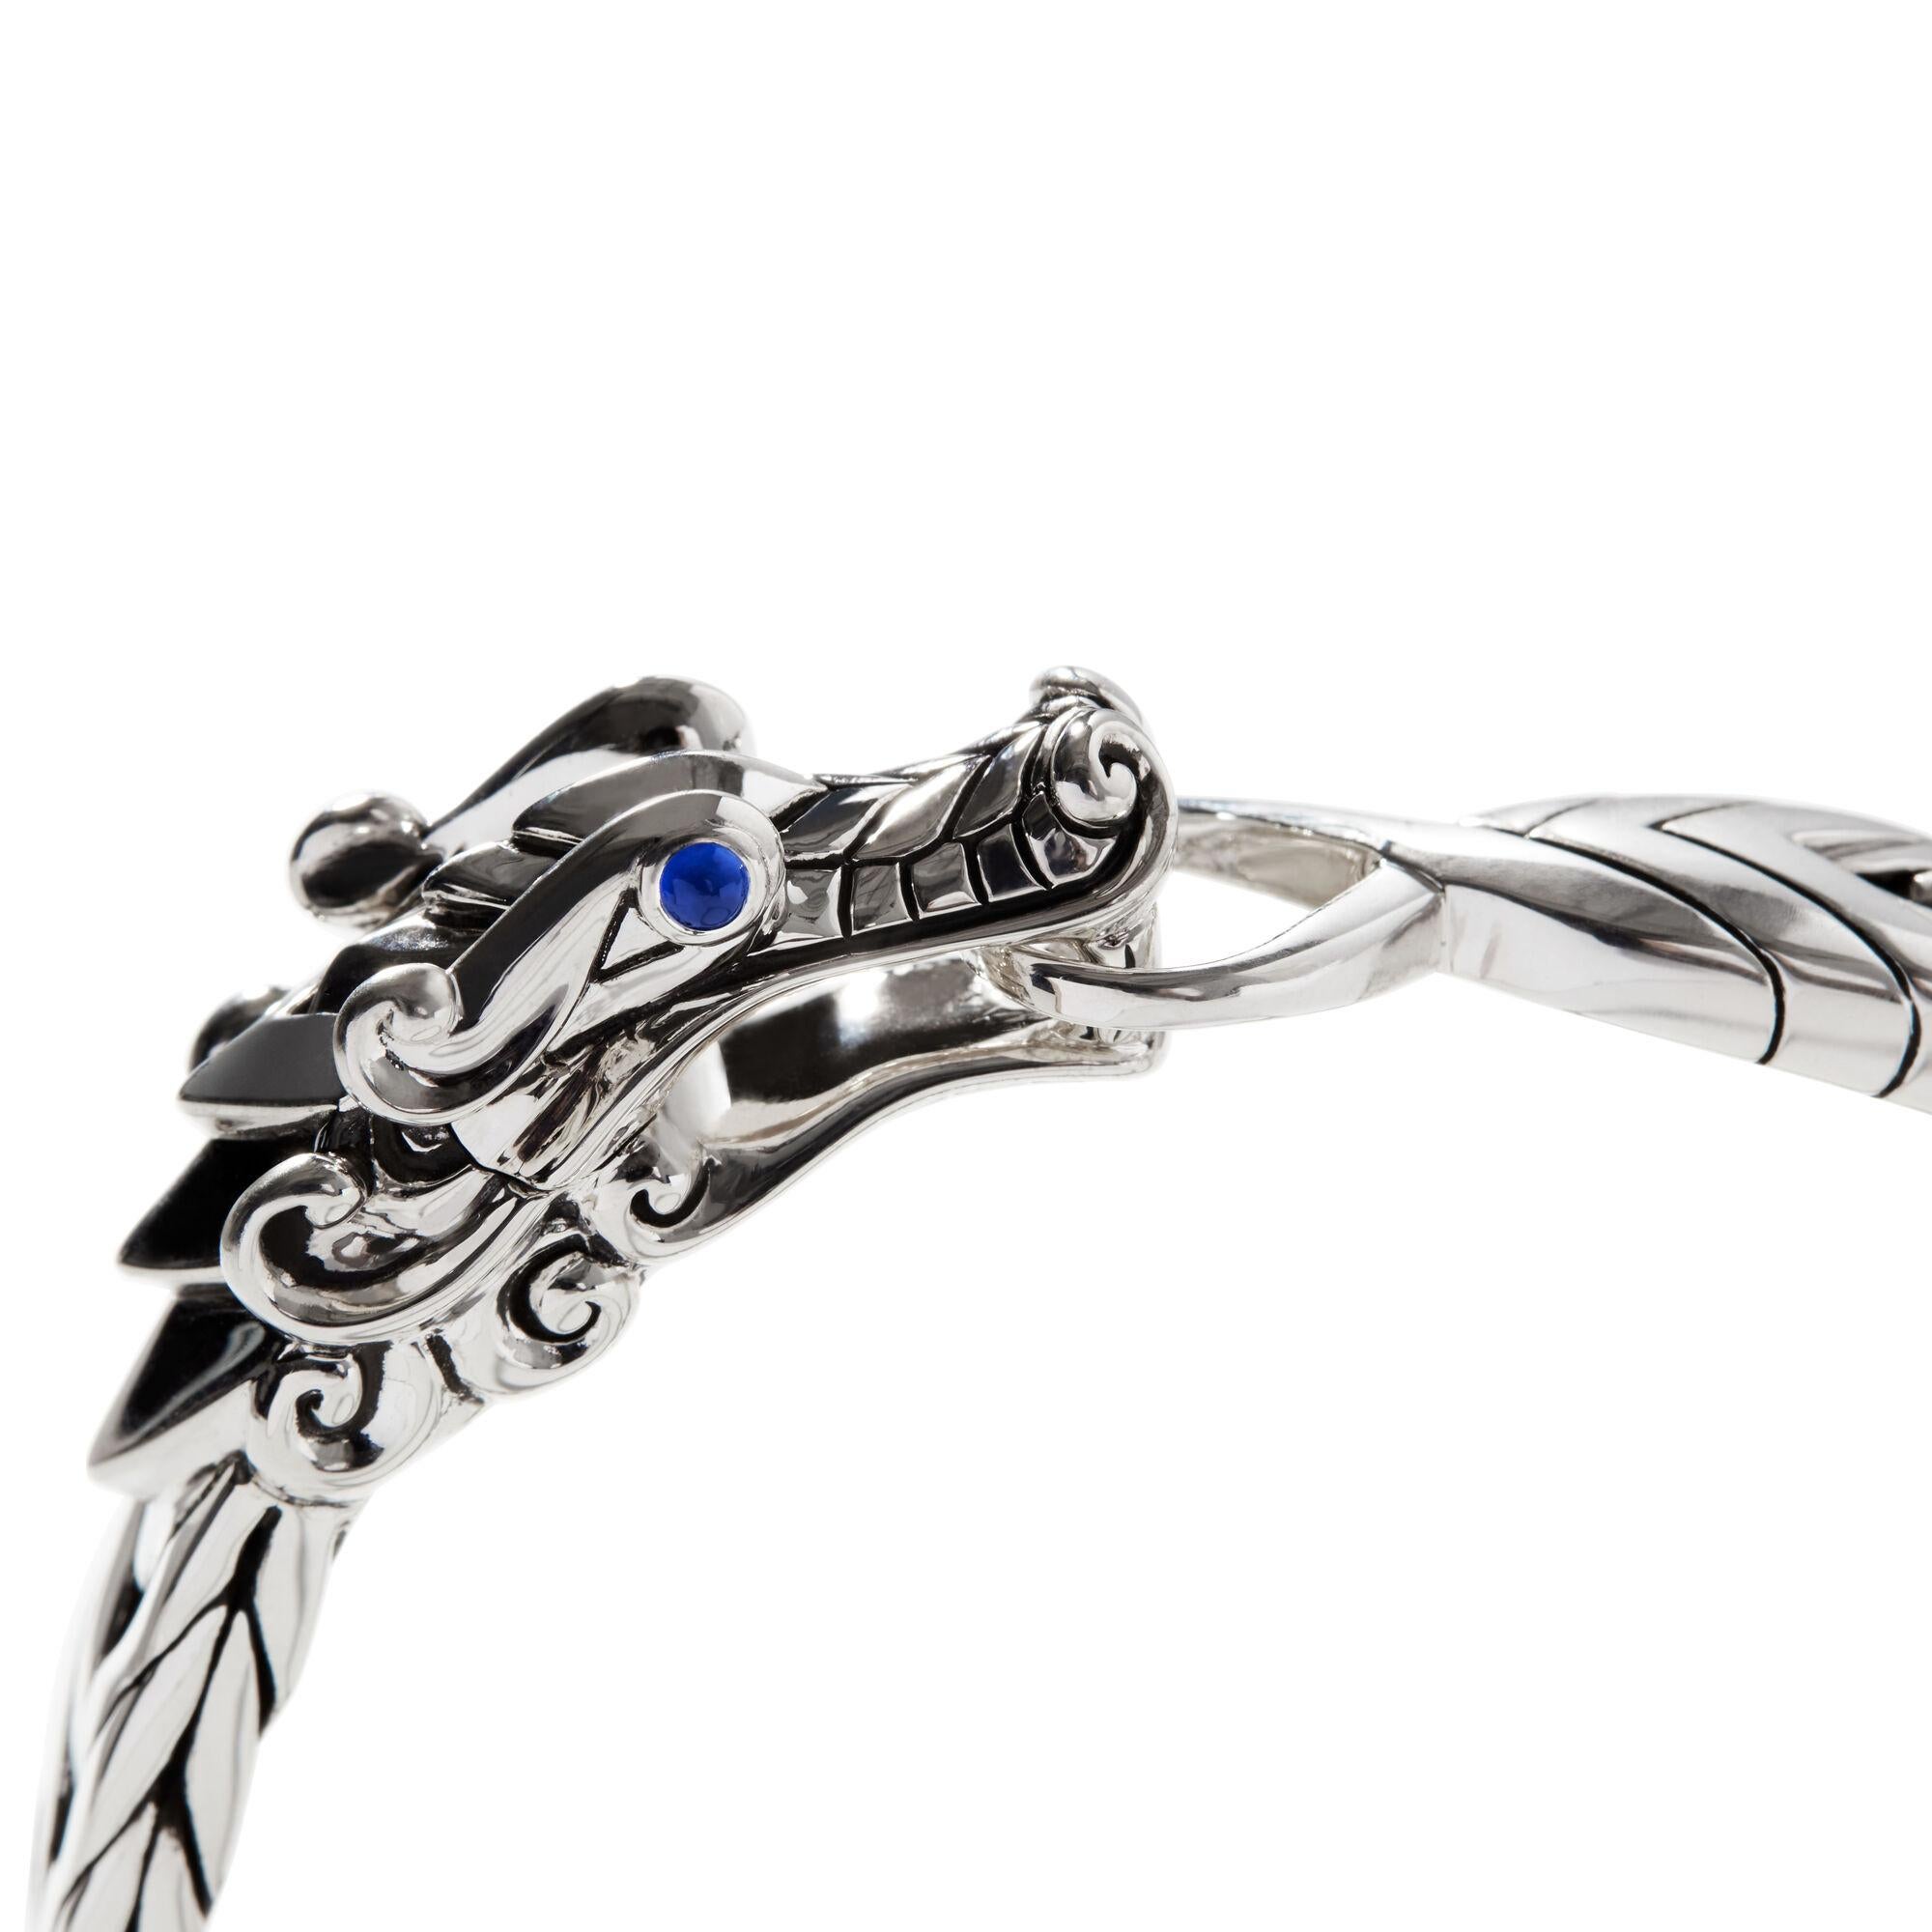 A symbol of eternal devotion, the majestic Naga Dragon stars in this bold men's bracelet. Crafted with John Hardy's signature modern link design in polished sterling silver and featuring blue sapphire accents.

From John Hardy's Legends Collection,